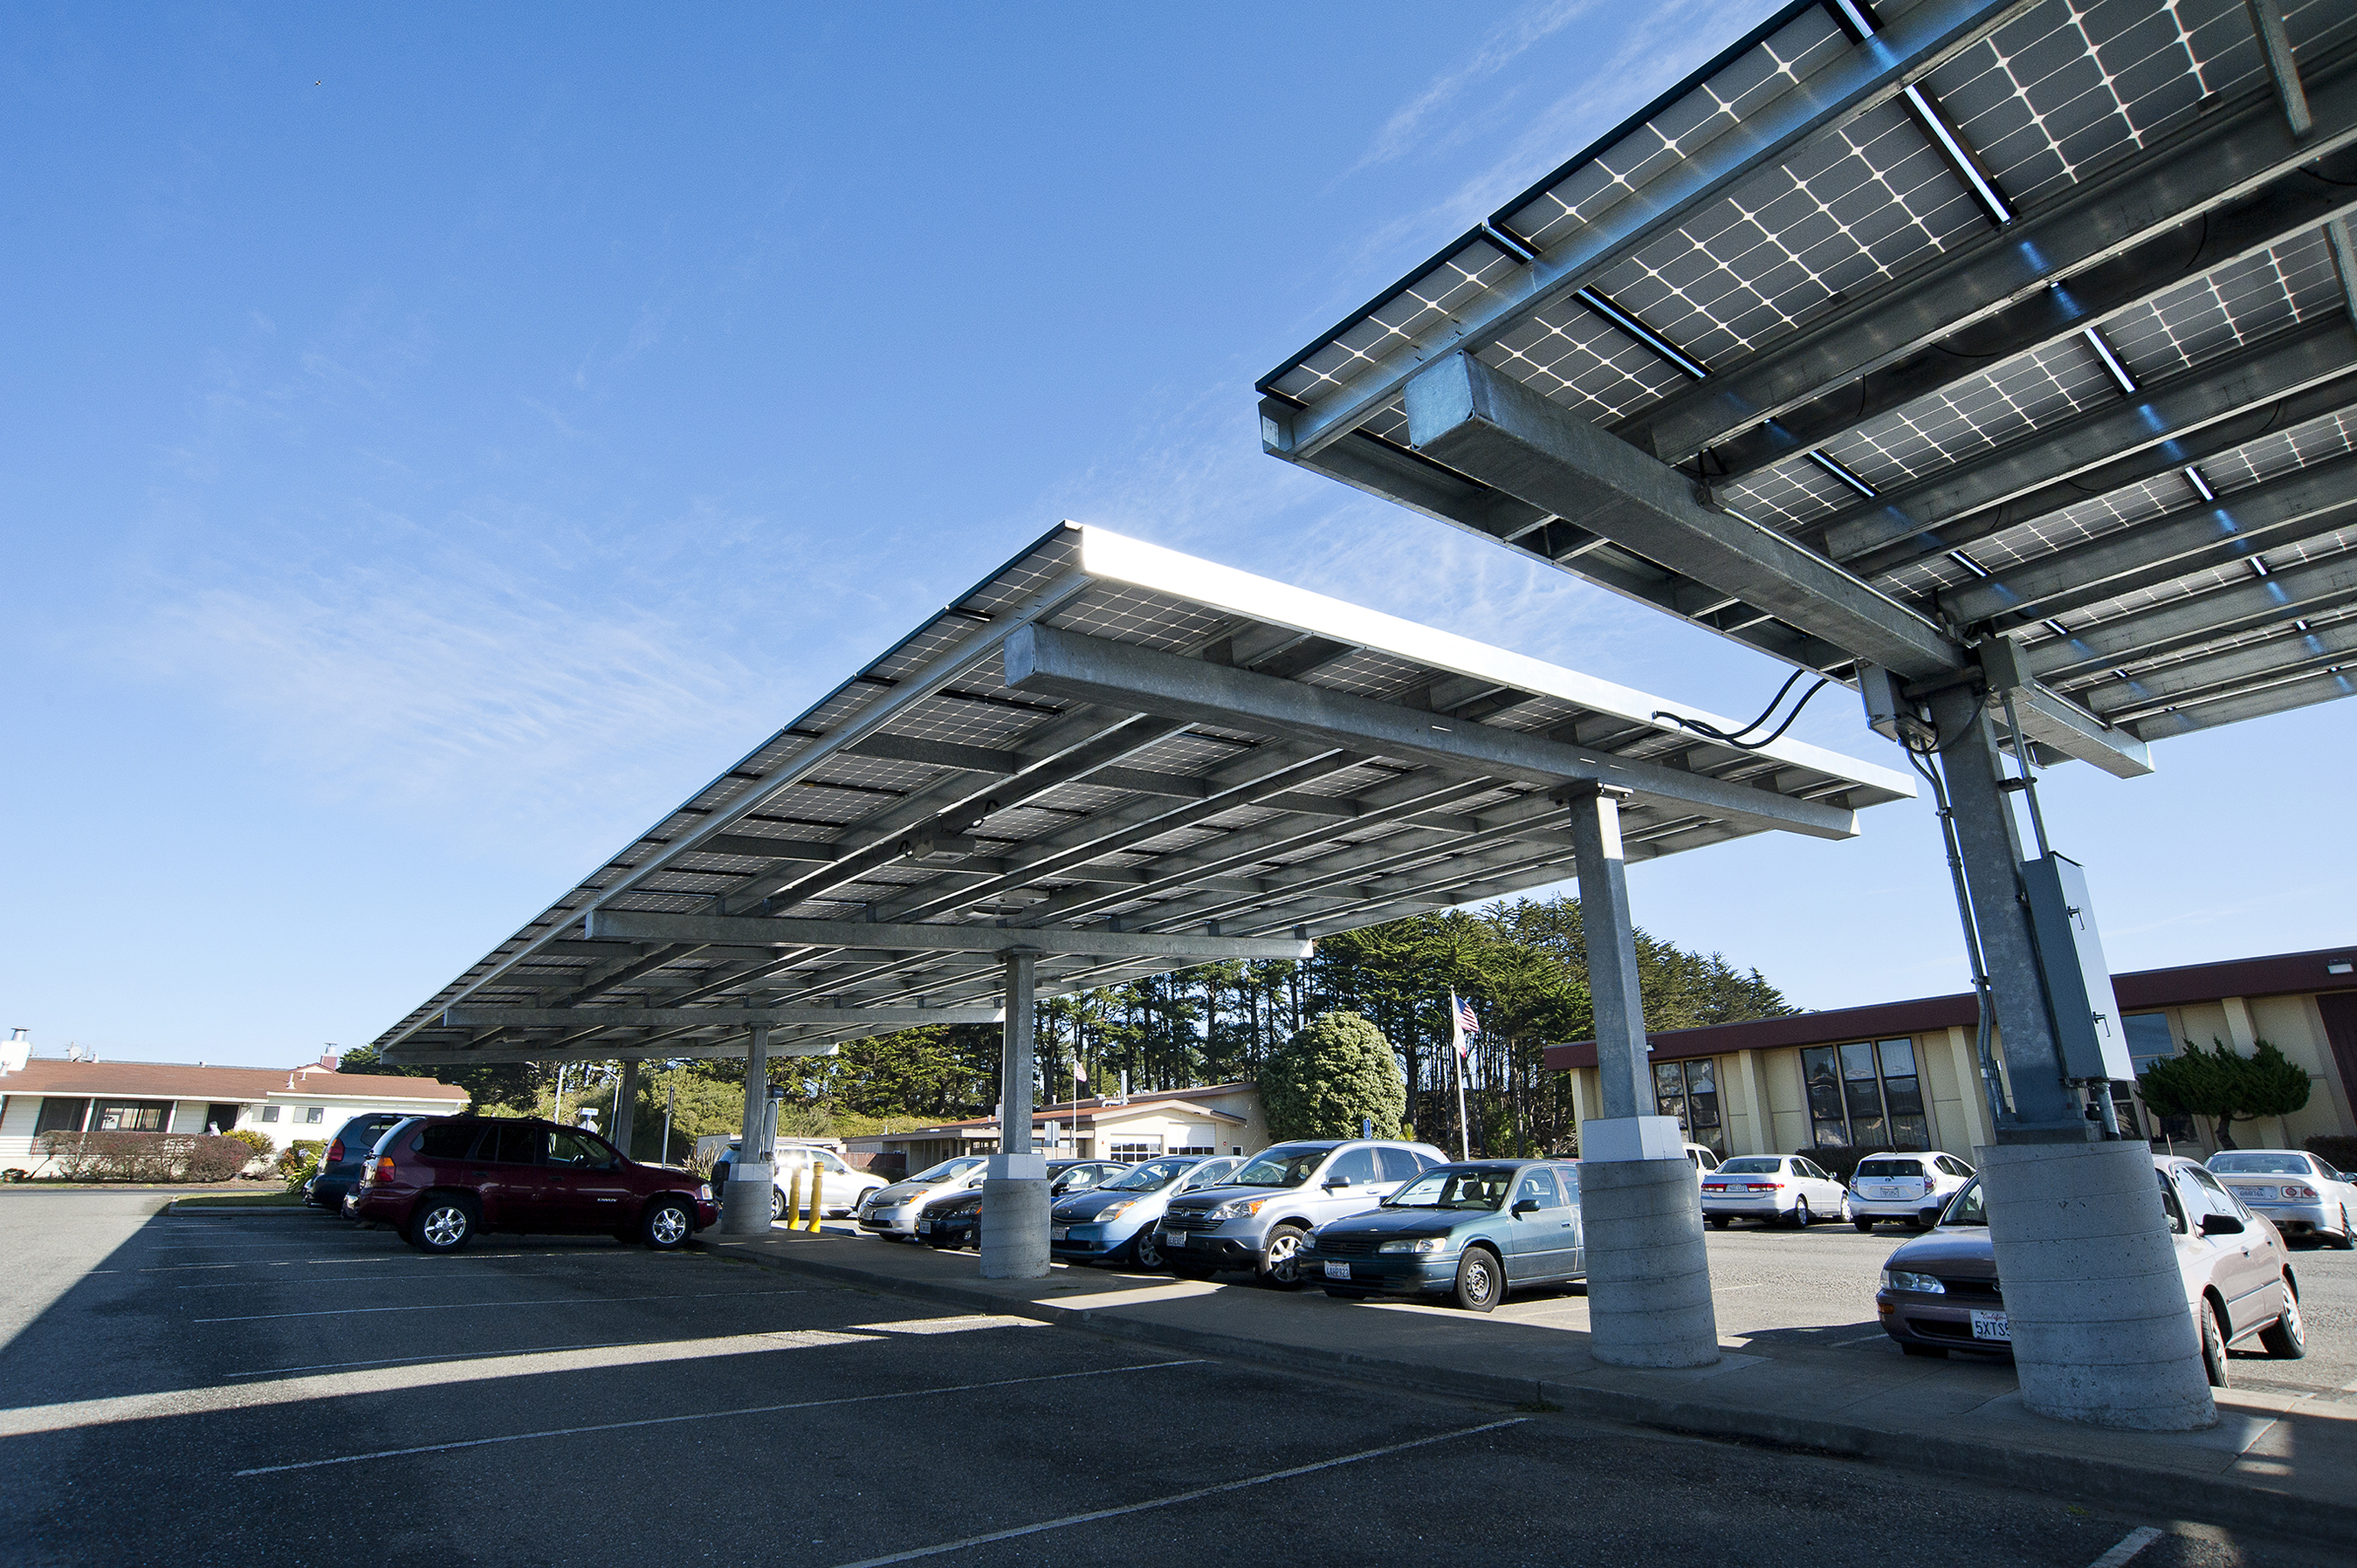 The solar and energy efficiency project includes solar electric generation facilities at 16 district sites, including the district office, shown here.  (PRNewsFoto/Chevron Energy Solutions)